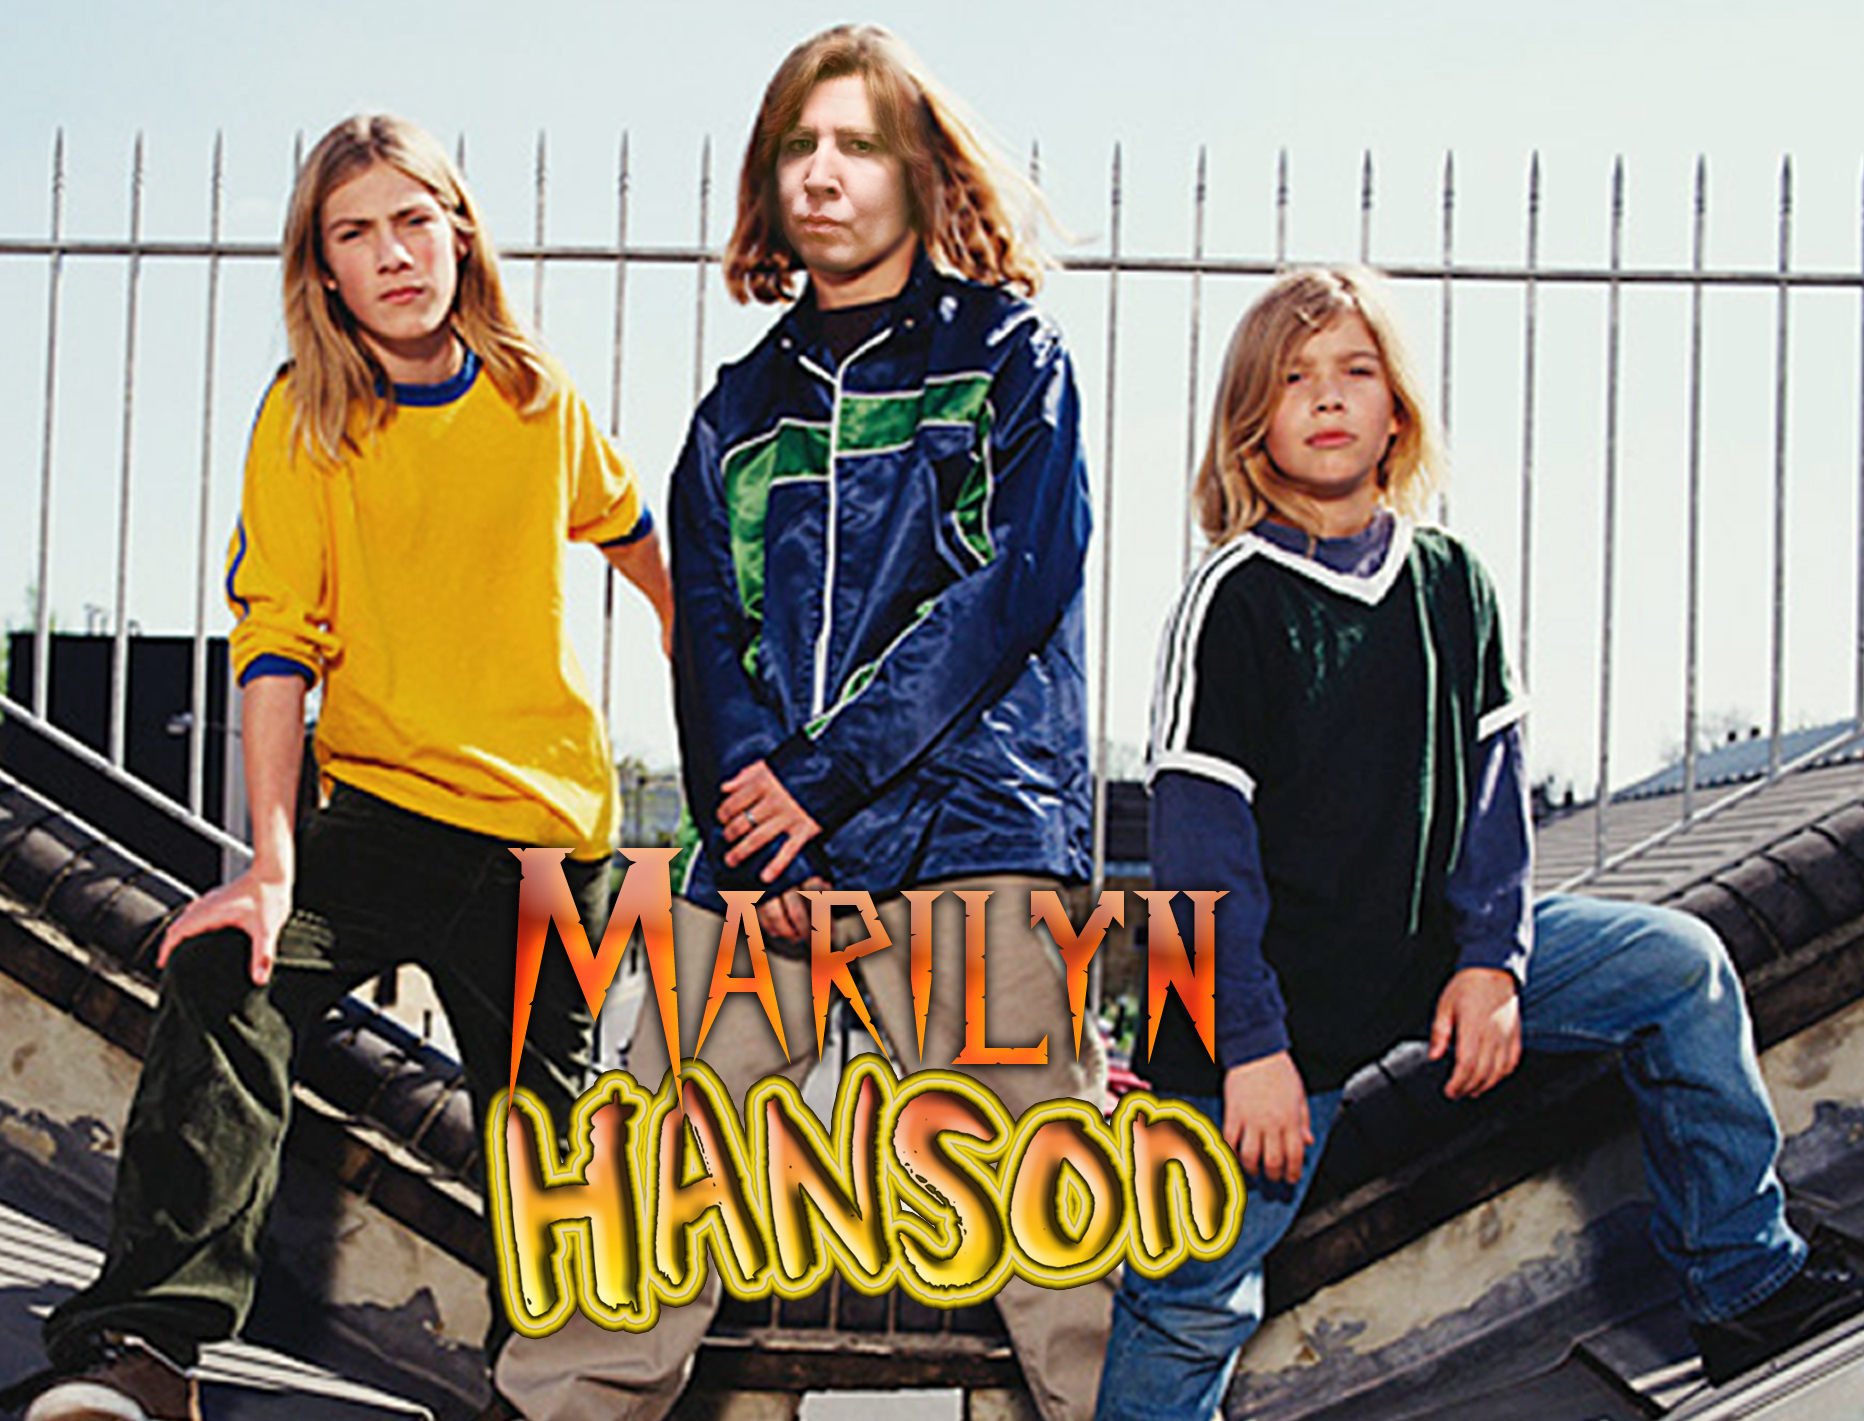 Before Marilyn Manson, there was Marilyn HANSON!